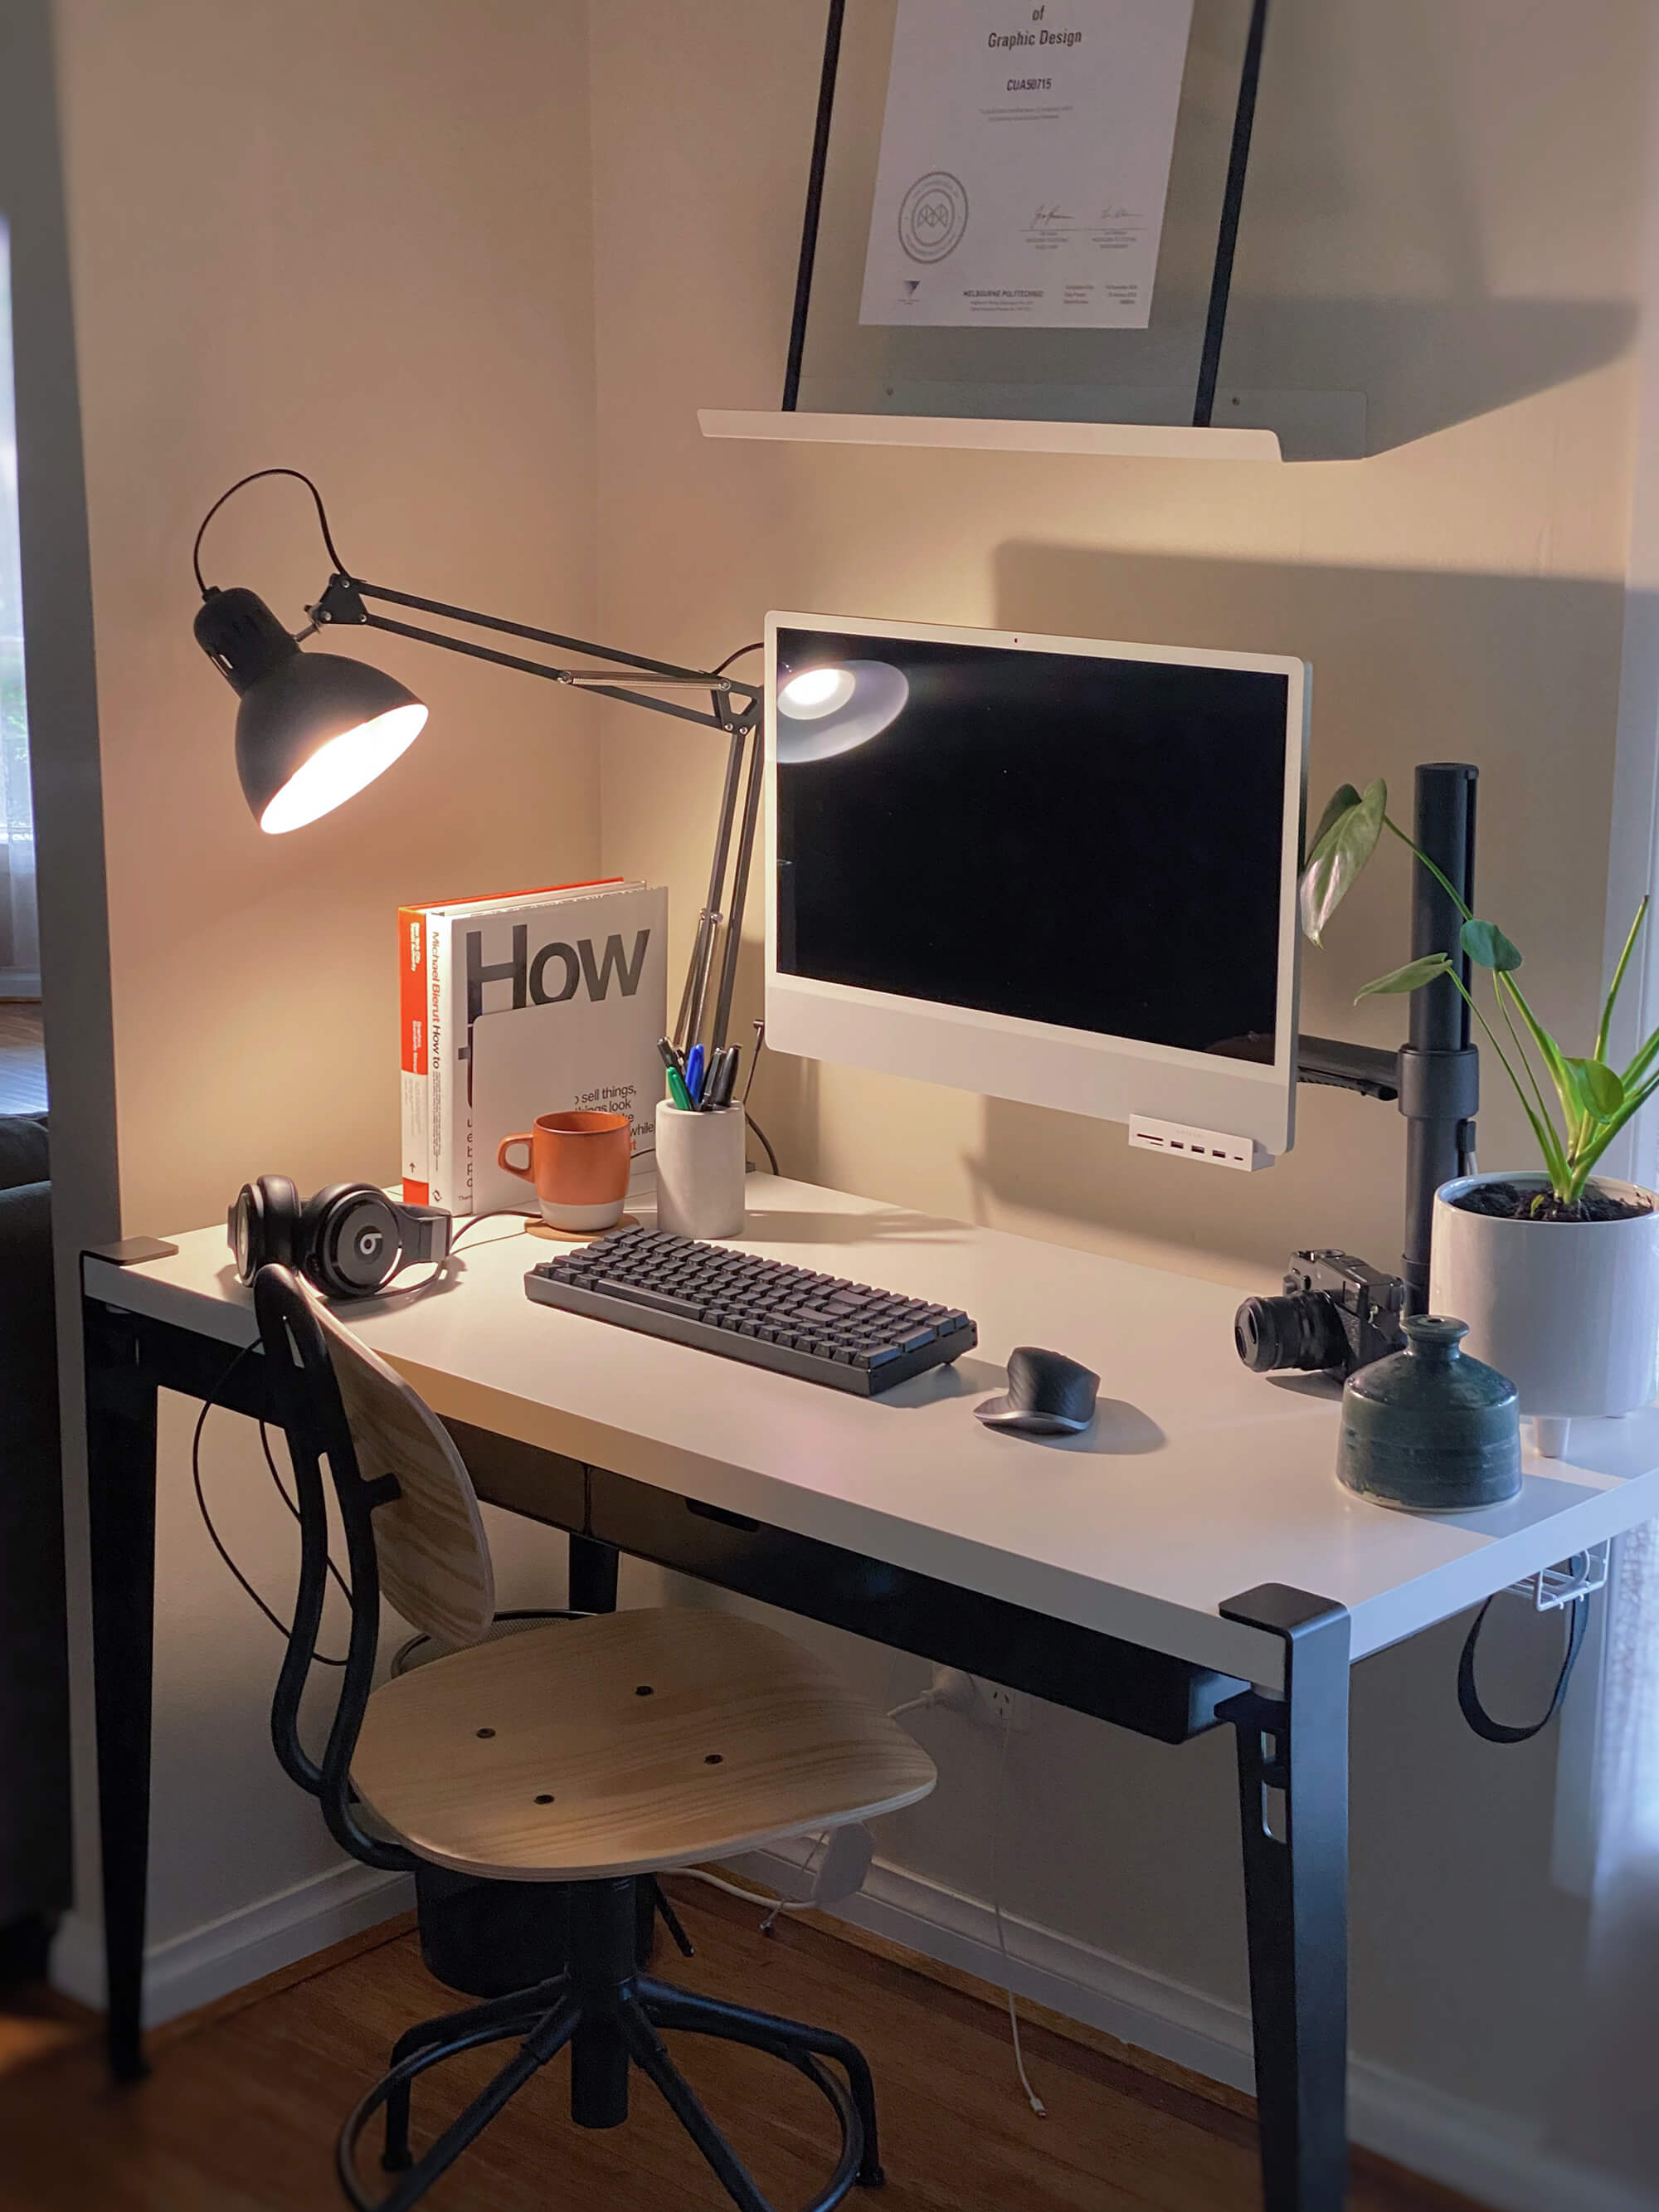 Retro home office setup with an IKEA chair and worktop